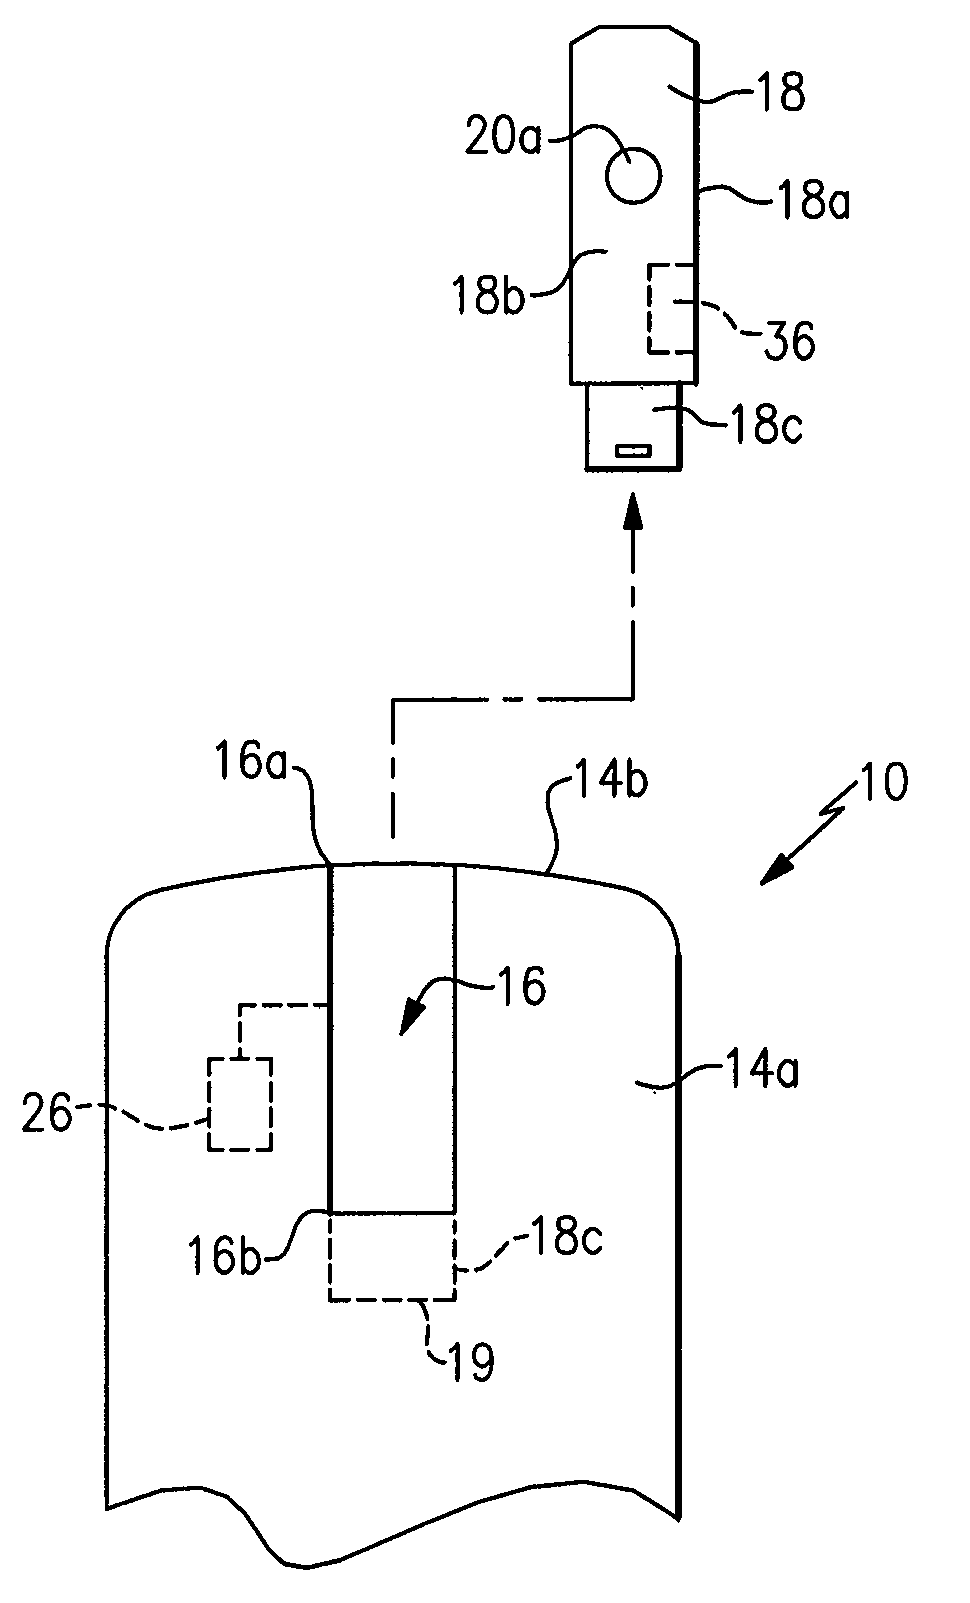 Electronic Device with Removable USB Flash Drive and USB Flash Drive with Added Functionality